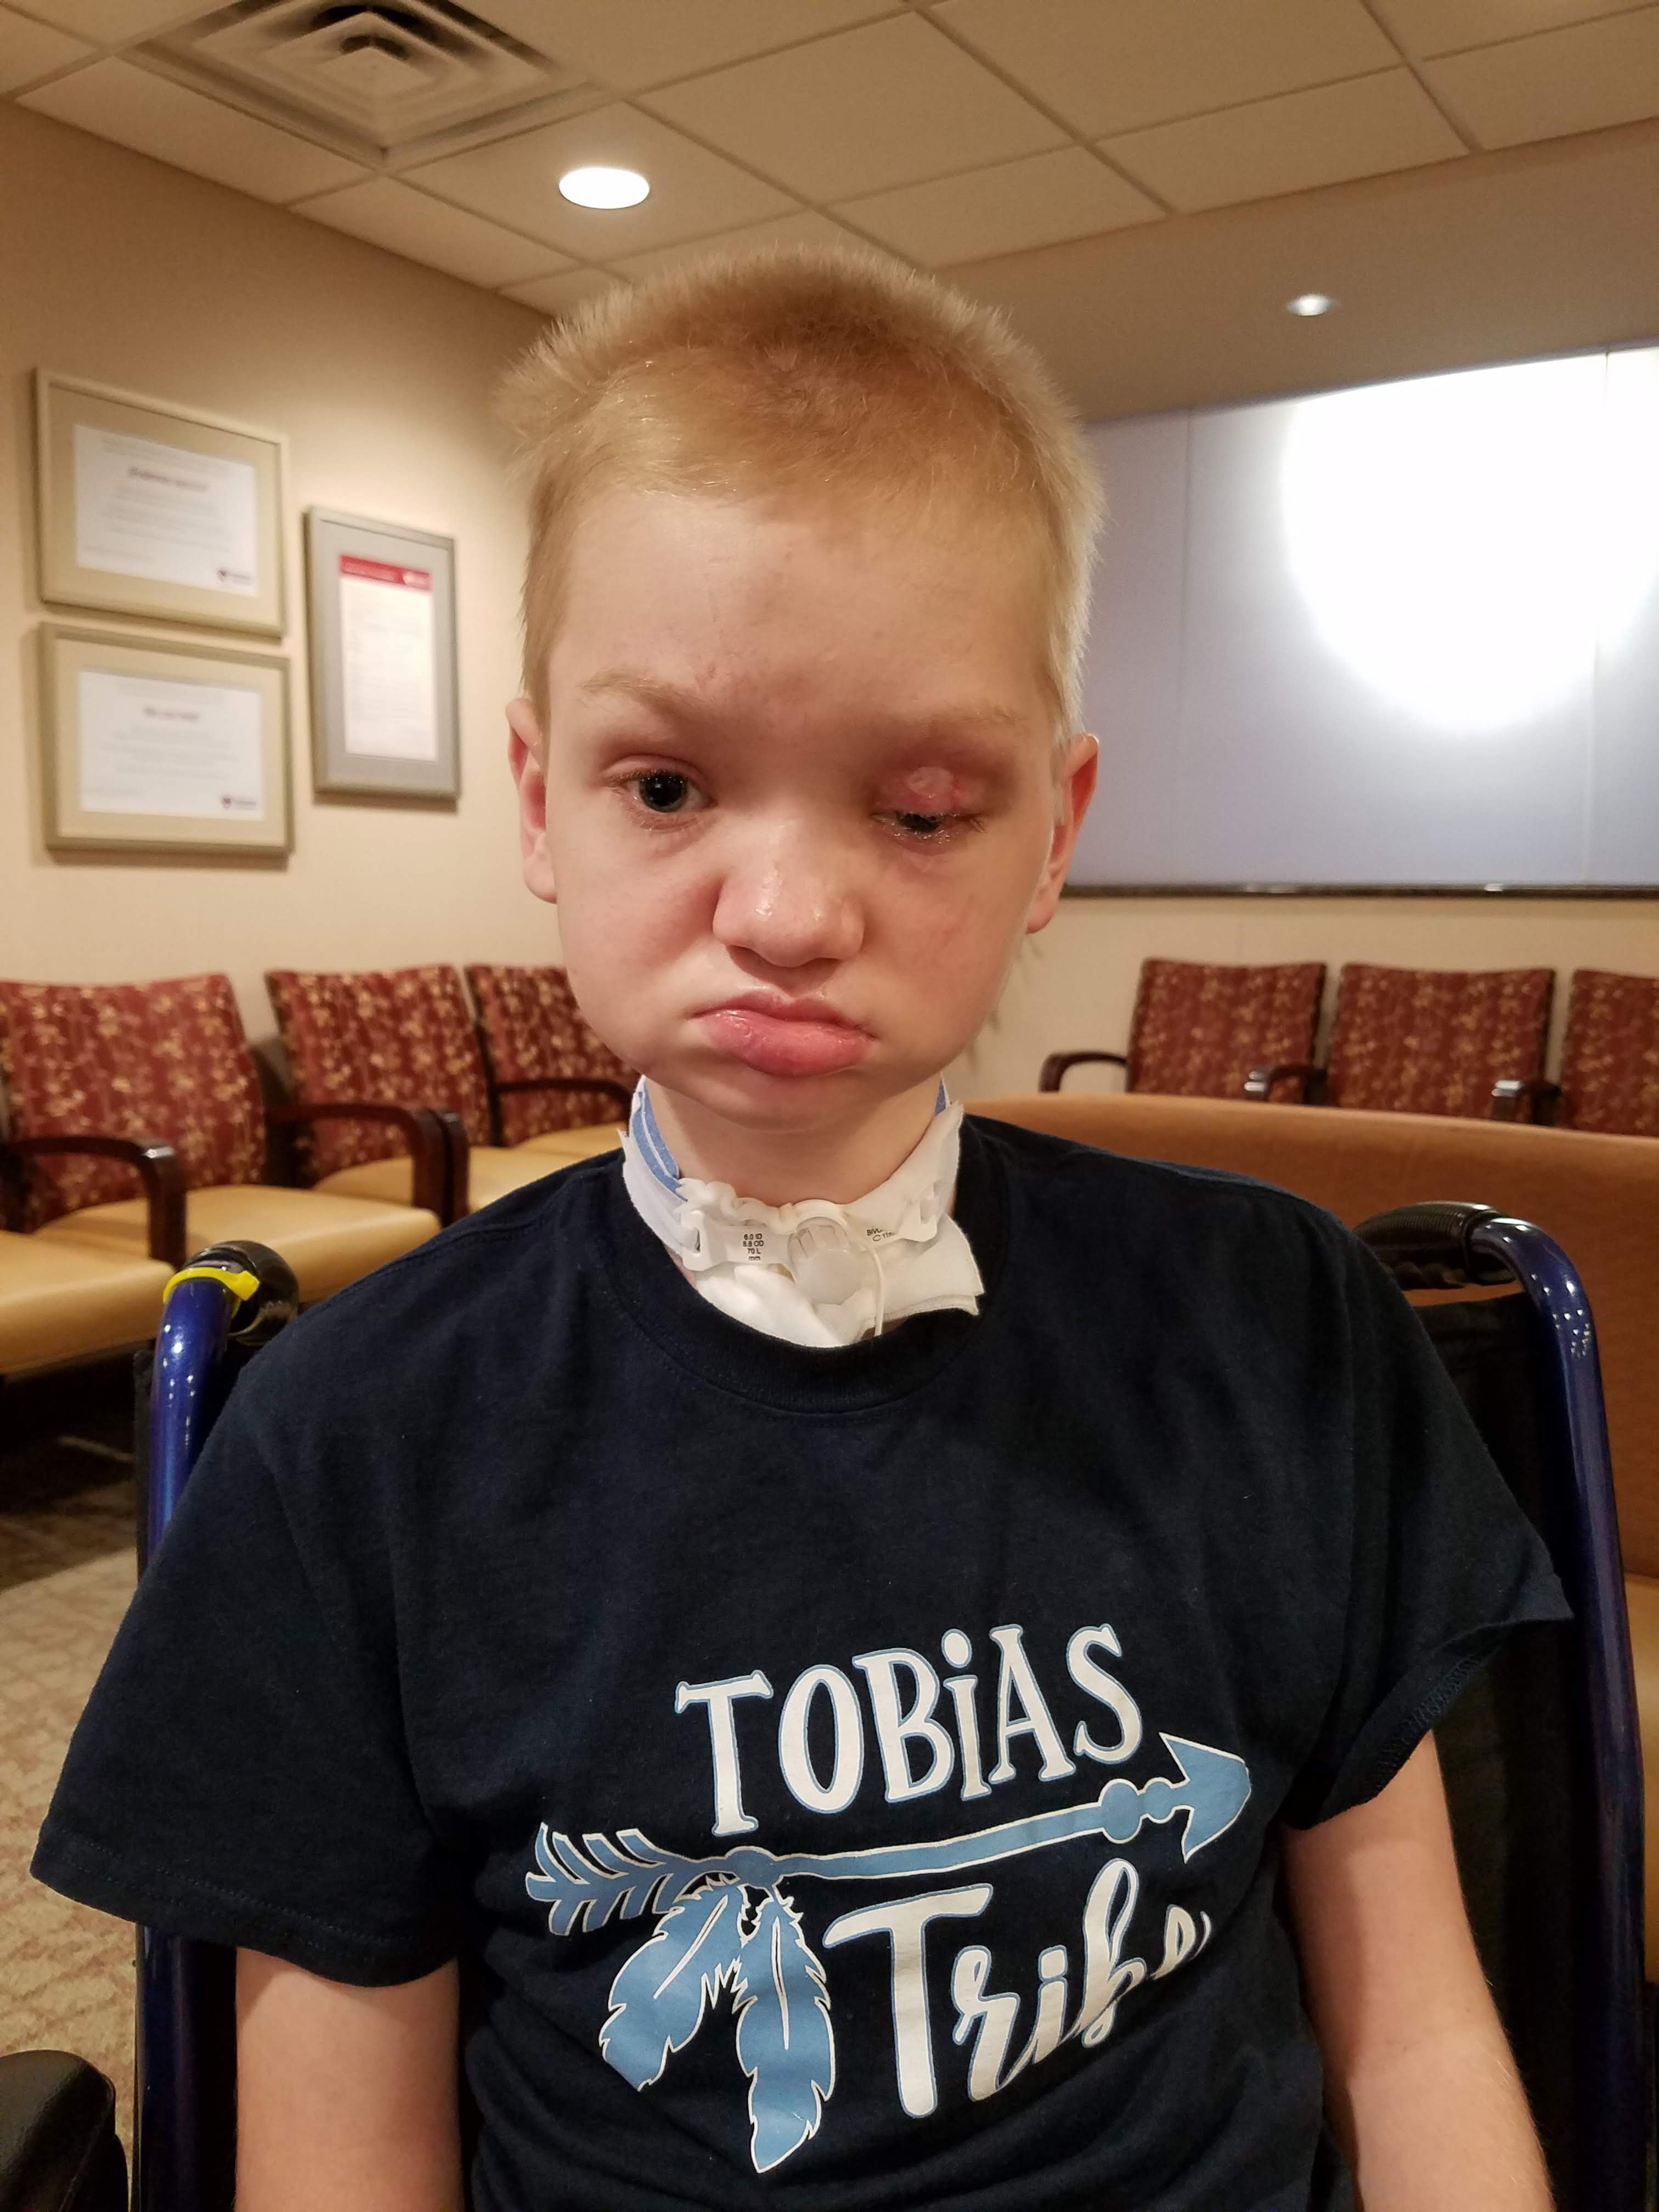 Caleb's face before reconstruction surgery #1 in July, 2019.